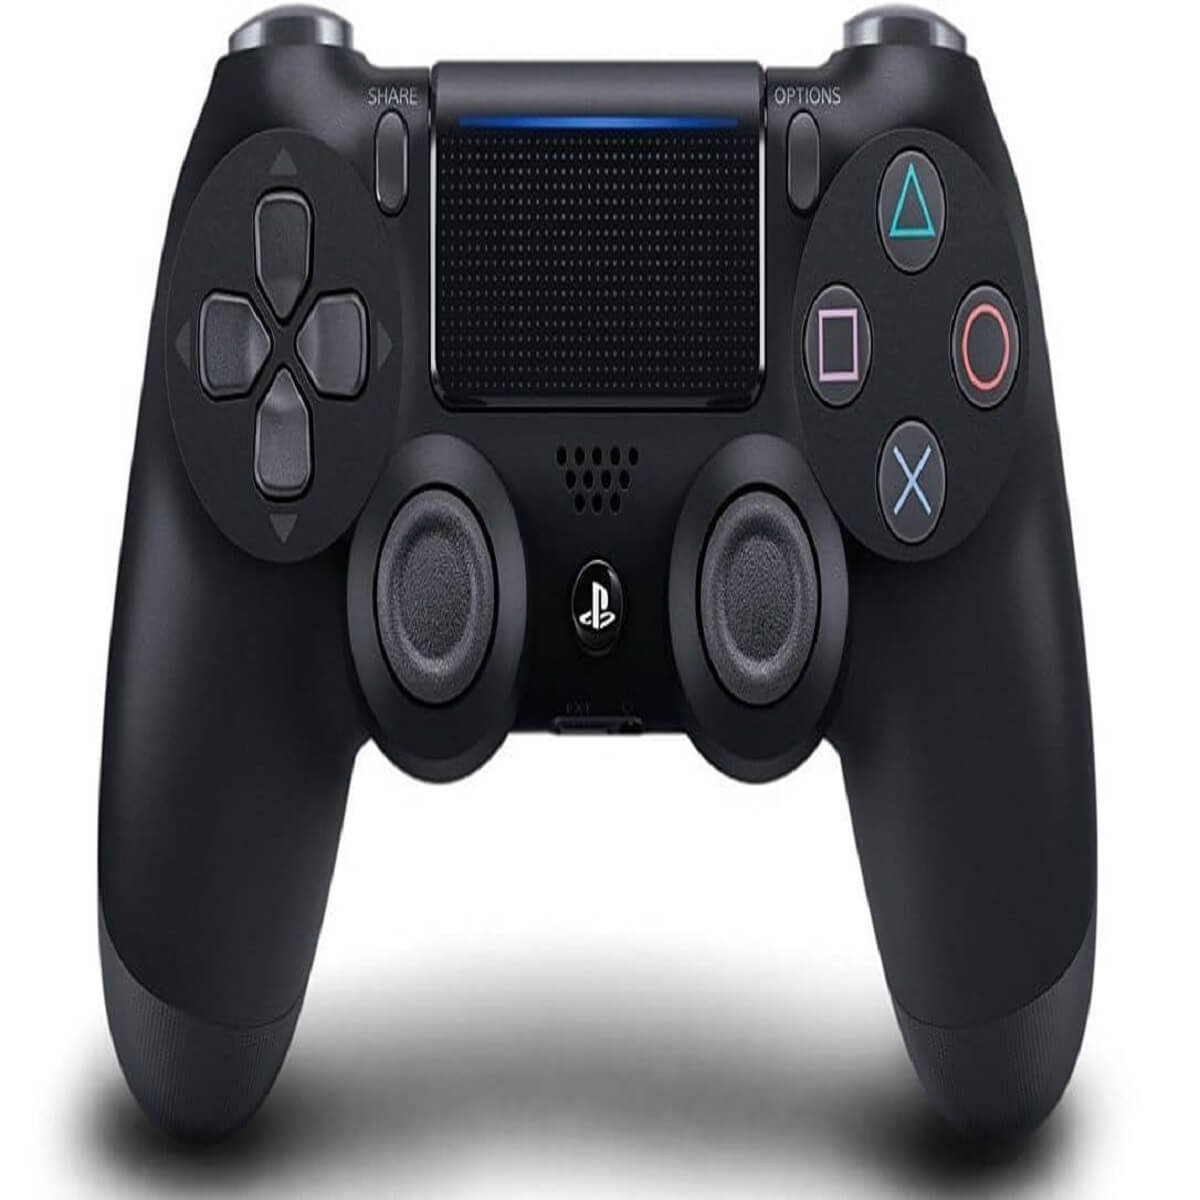 How do I get Steam to recognize my PS4 controller?